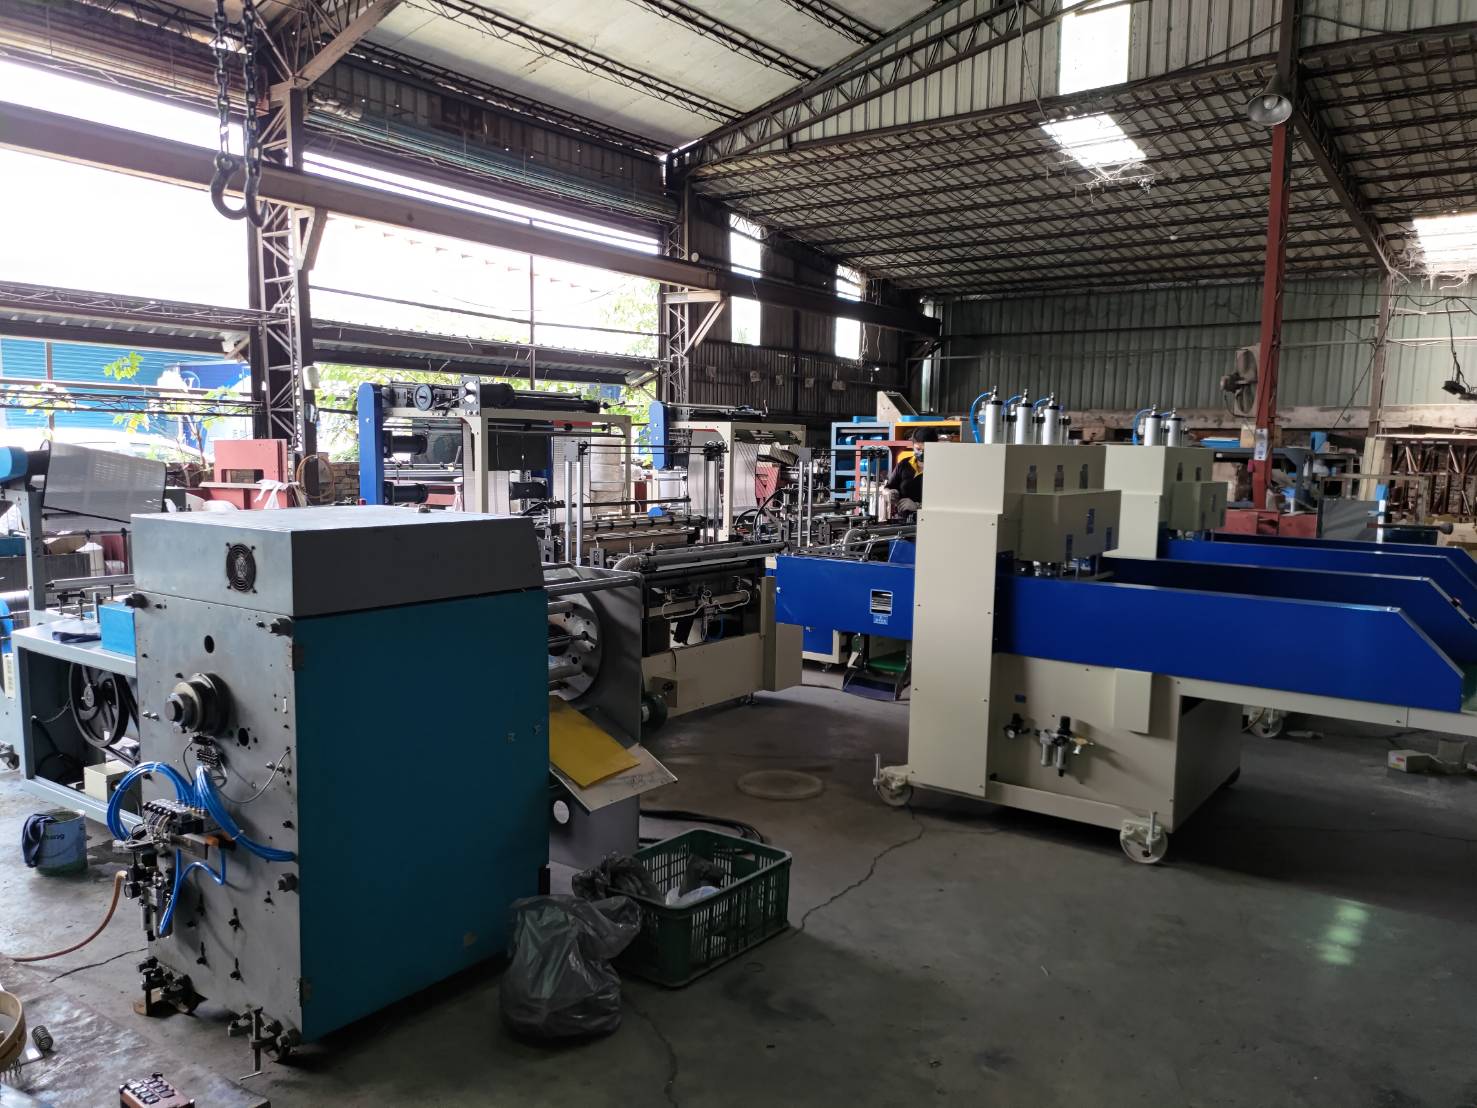 Dipo Plastic Machinery Co., Ltd. thanks customers for their continued support-Purchase blowing machine, bag making machine and automatic packaging machine